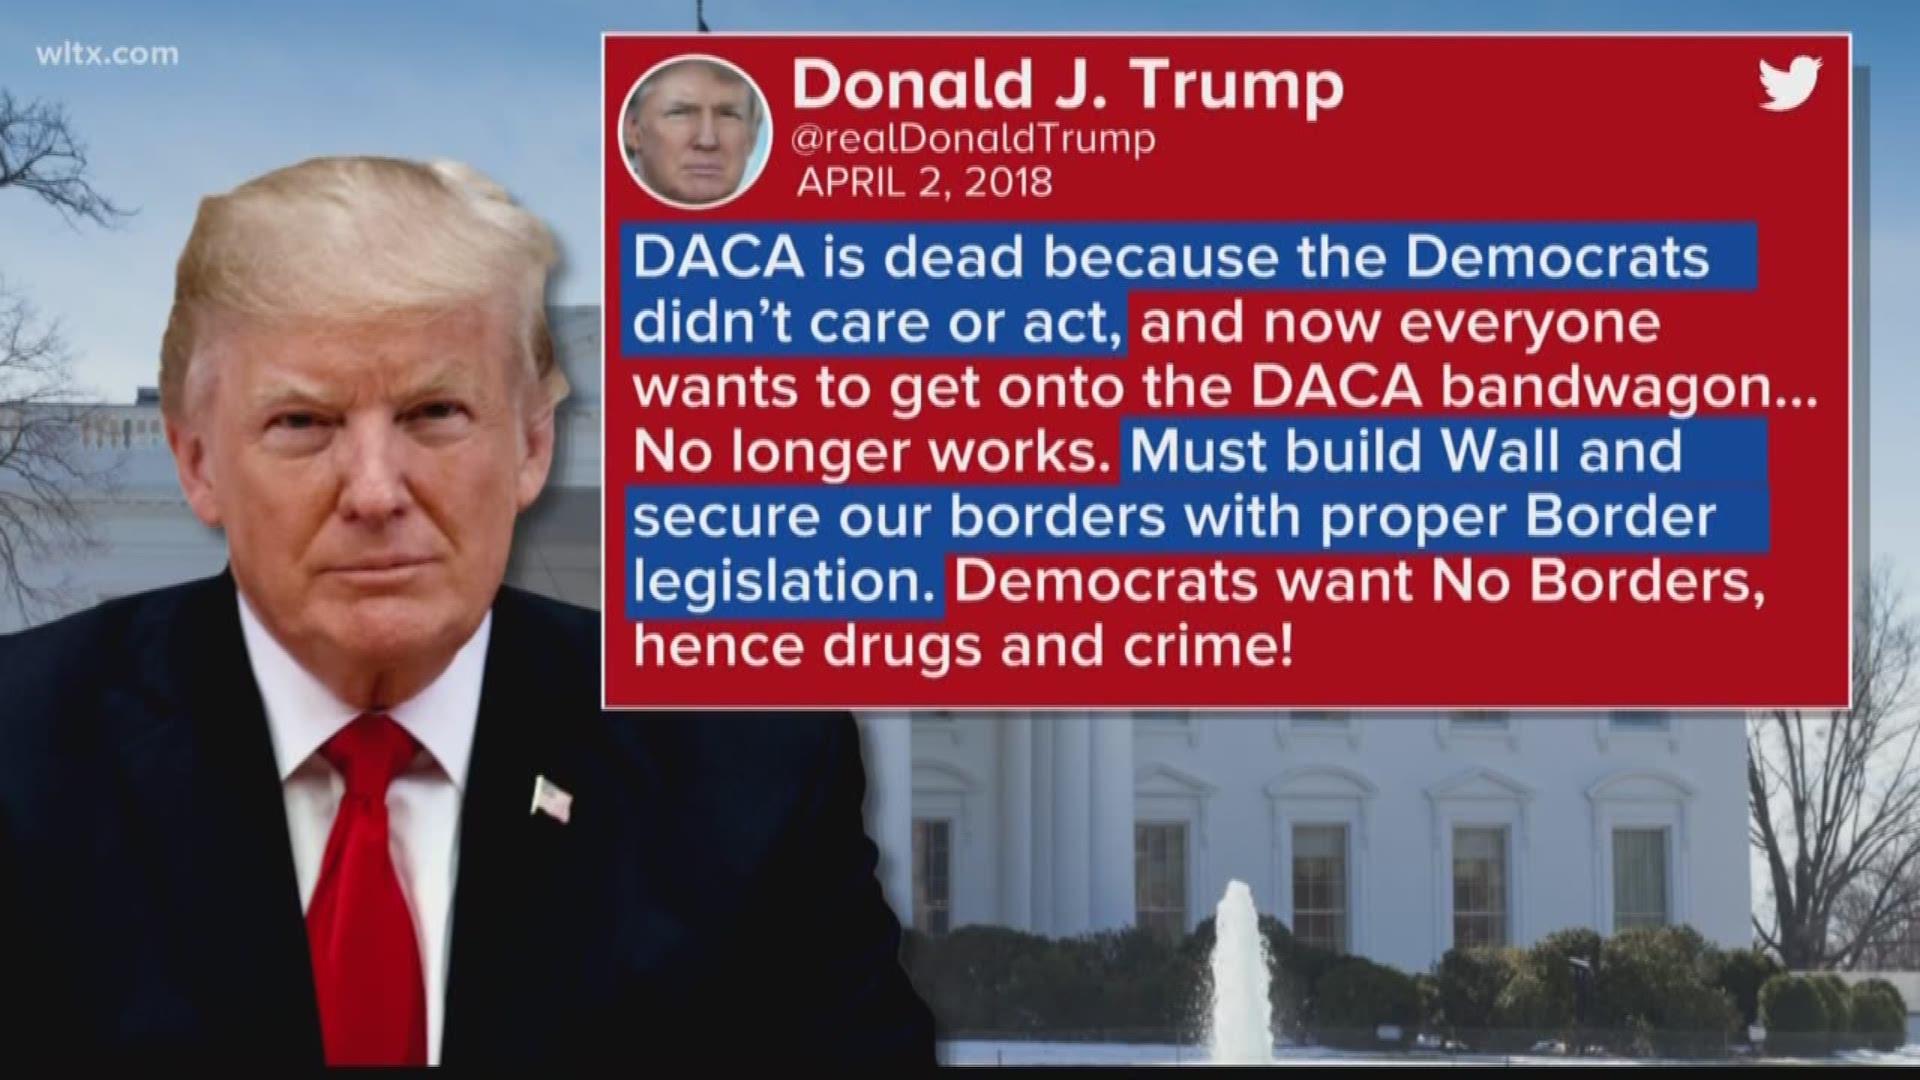 President Donald Trump is blaming Democrats and Mexico for the failure of the DACA effort.